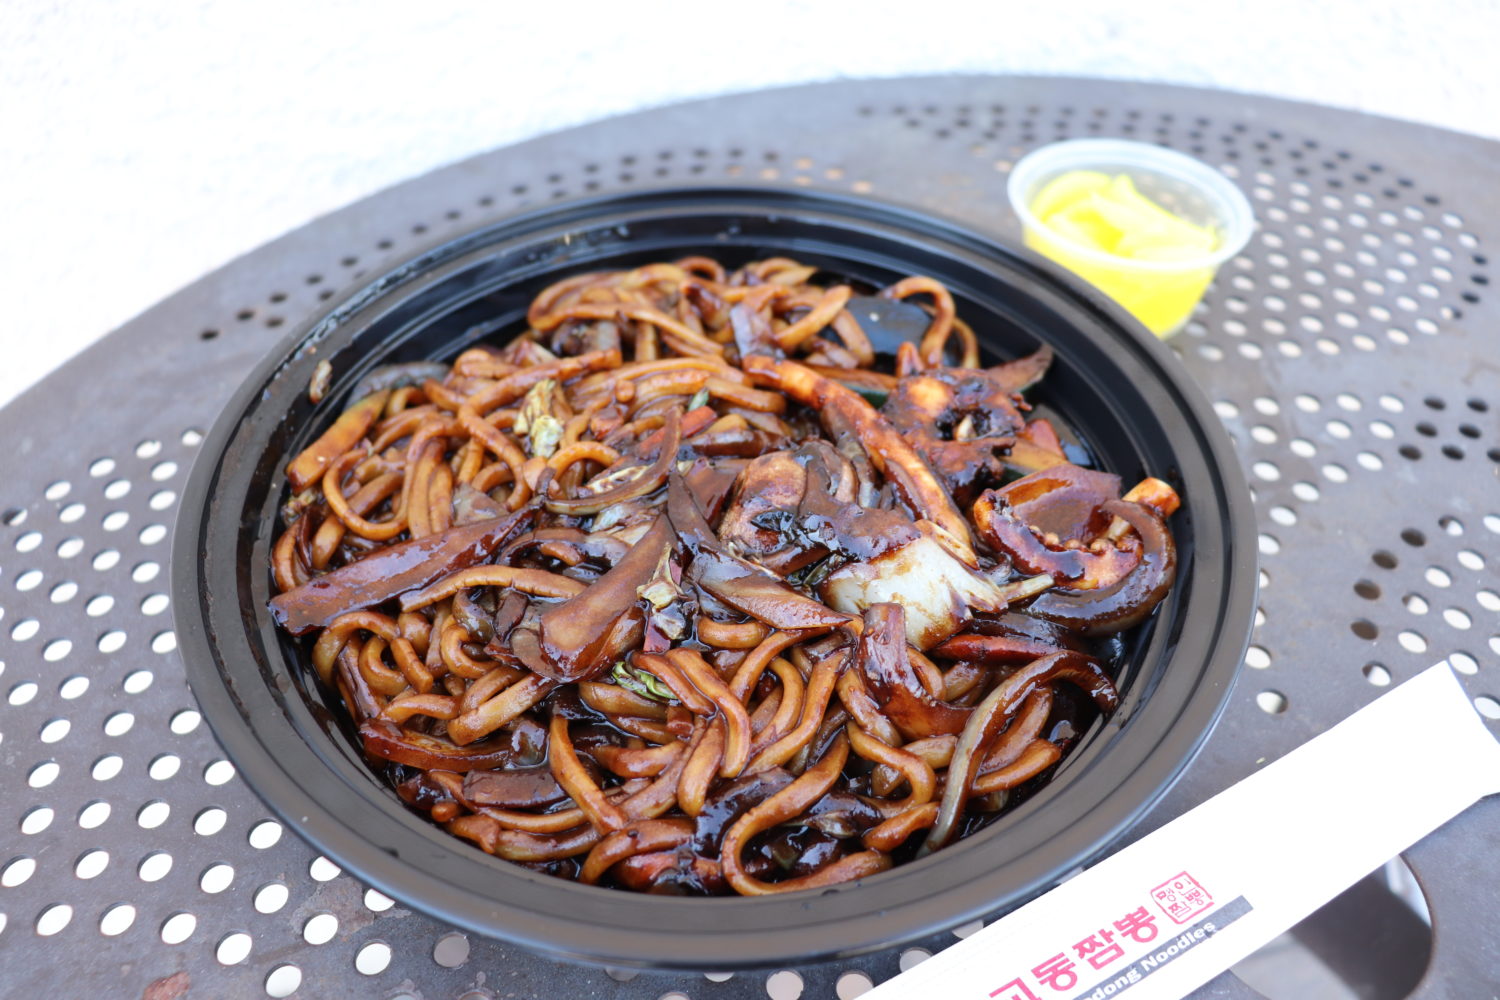 Kyodang Noodles: Irvine’s New Hub for Jajangmyeon Delights